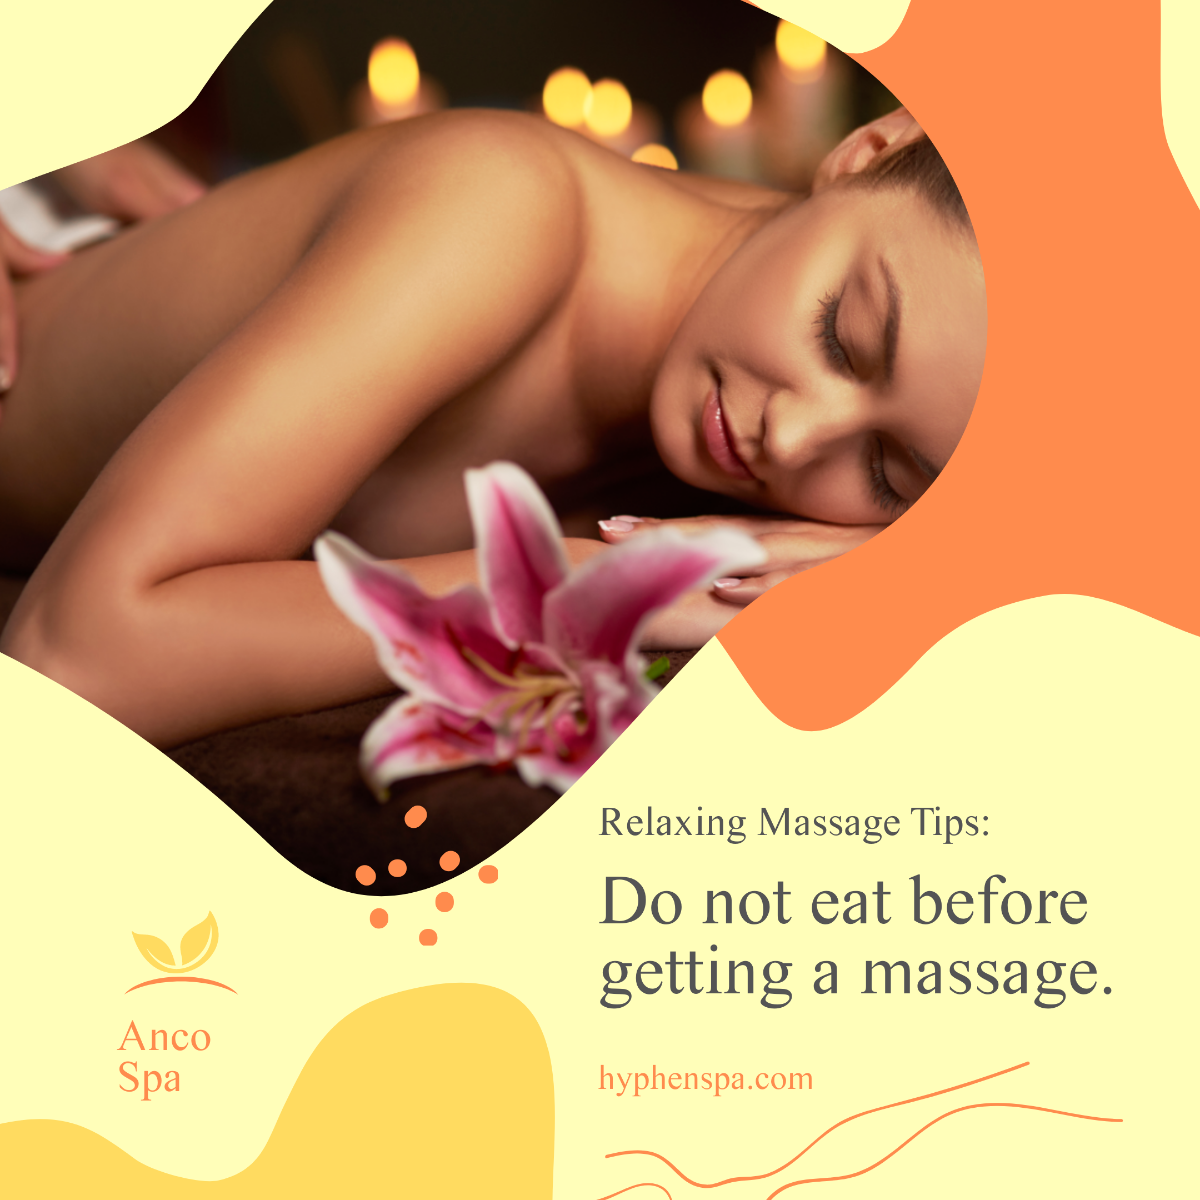 Relaxing Massage Tips And Tricks Post, Instagram, Facebook Template